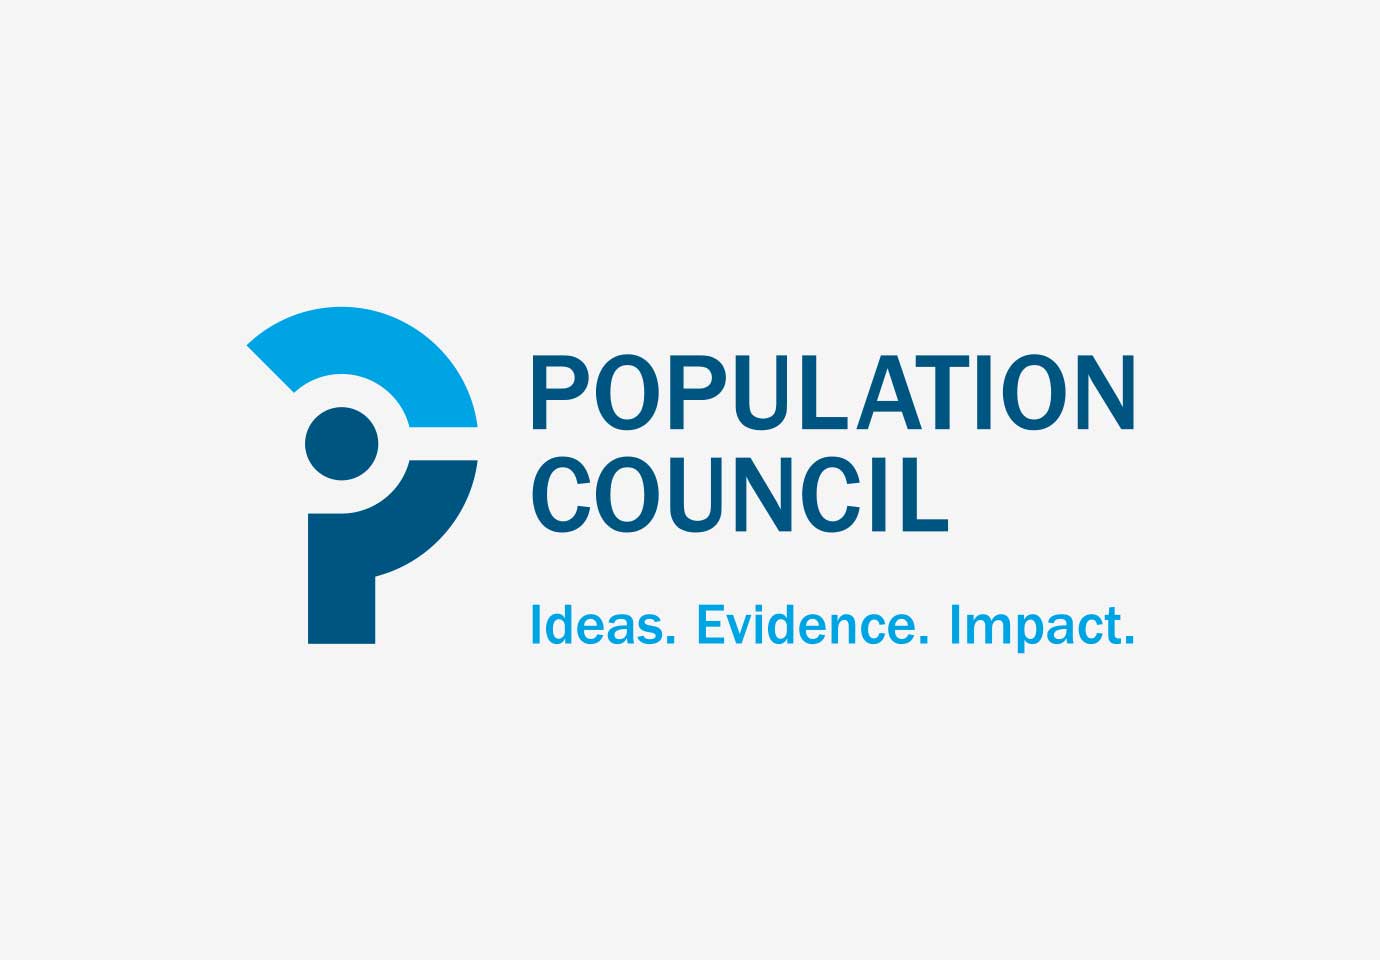 Population Council logotype and symbol, with the brand tagline "Idea, evidence, impact."